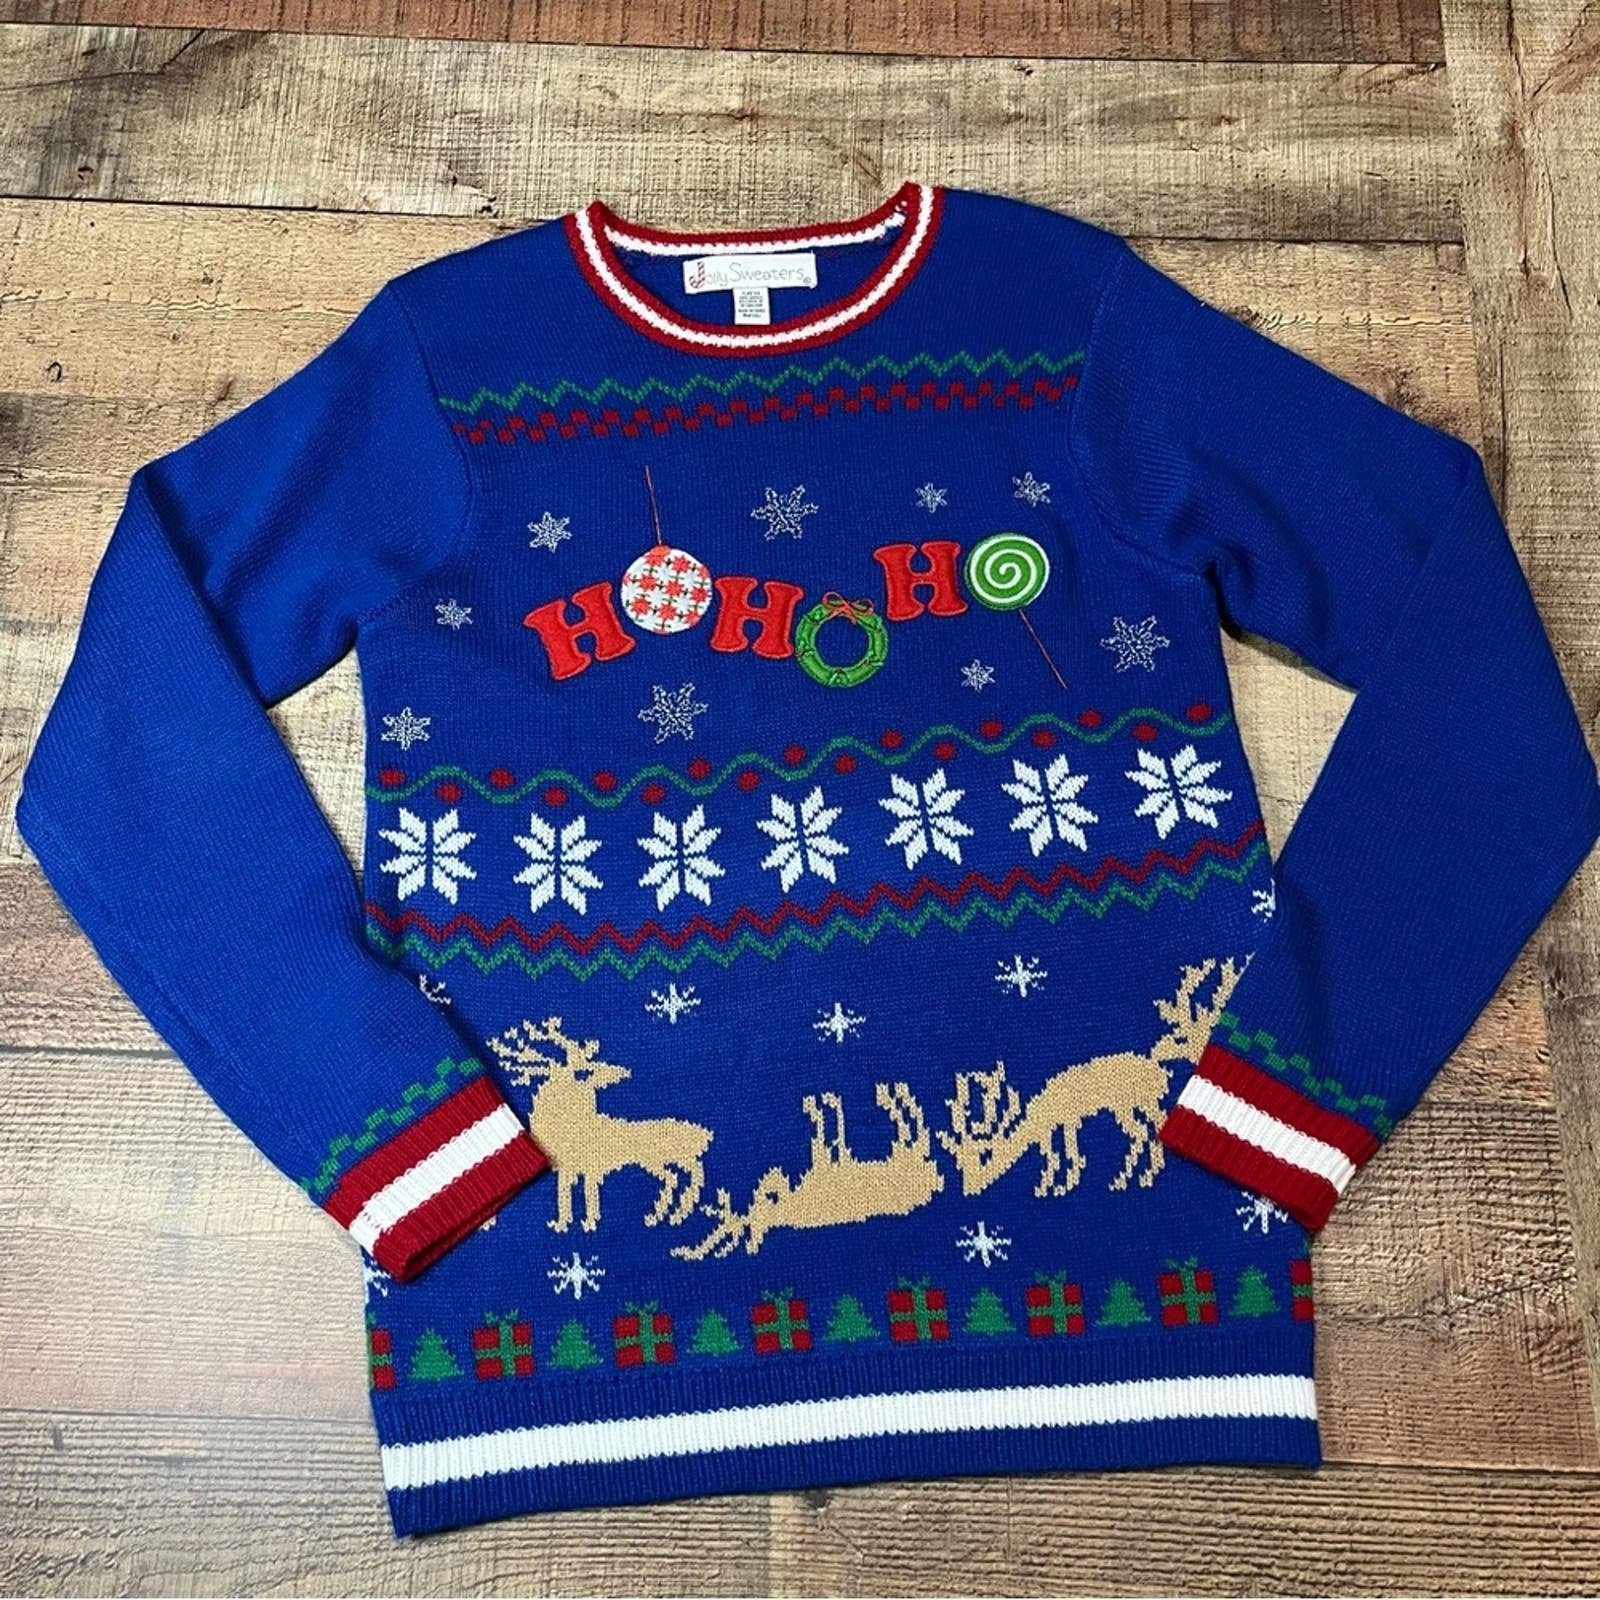 large selection Jolly Sweaters | Blue HOHOHO Holiday Ugly Christmas Sweater Sz S NRhL5nCHn outlet online shop